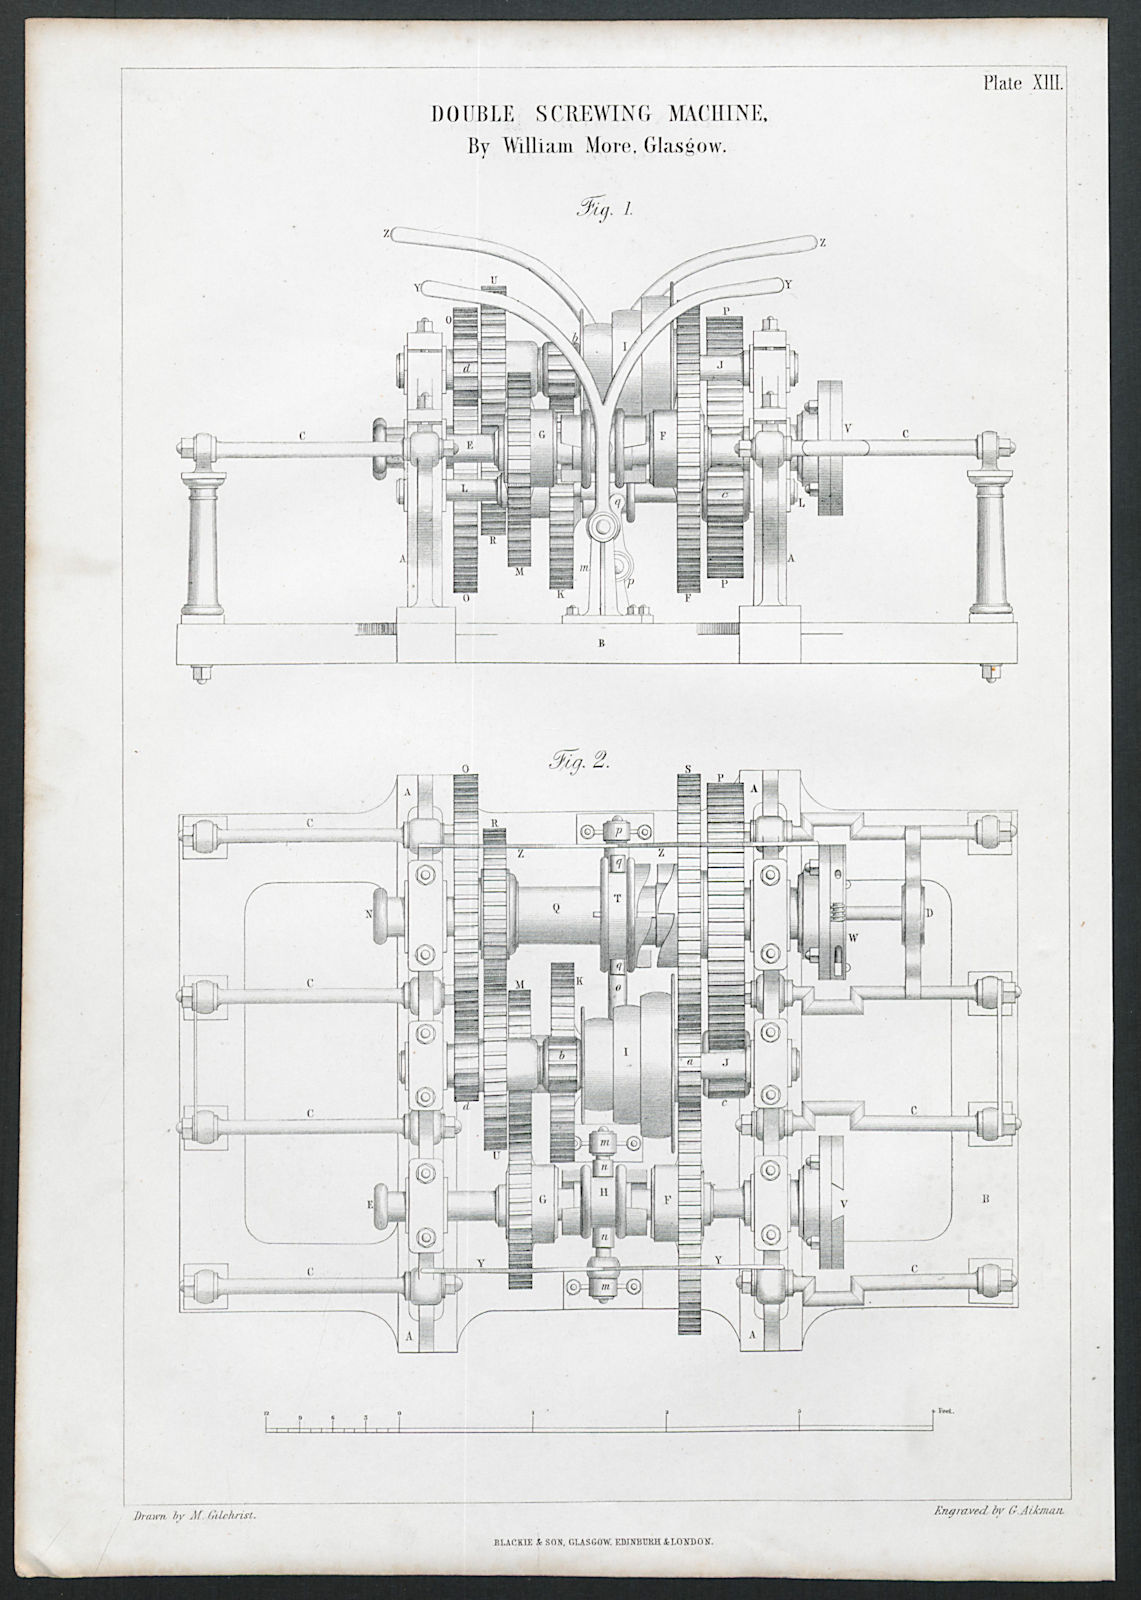 19C ENGINEERING DRAWING Double screwing machine. William More, Glasgow 1847